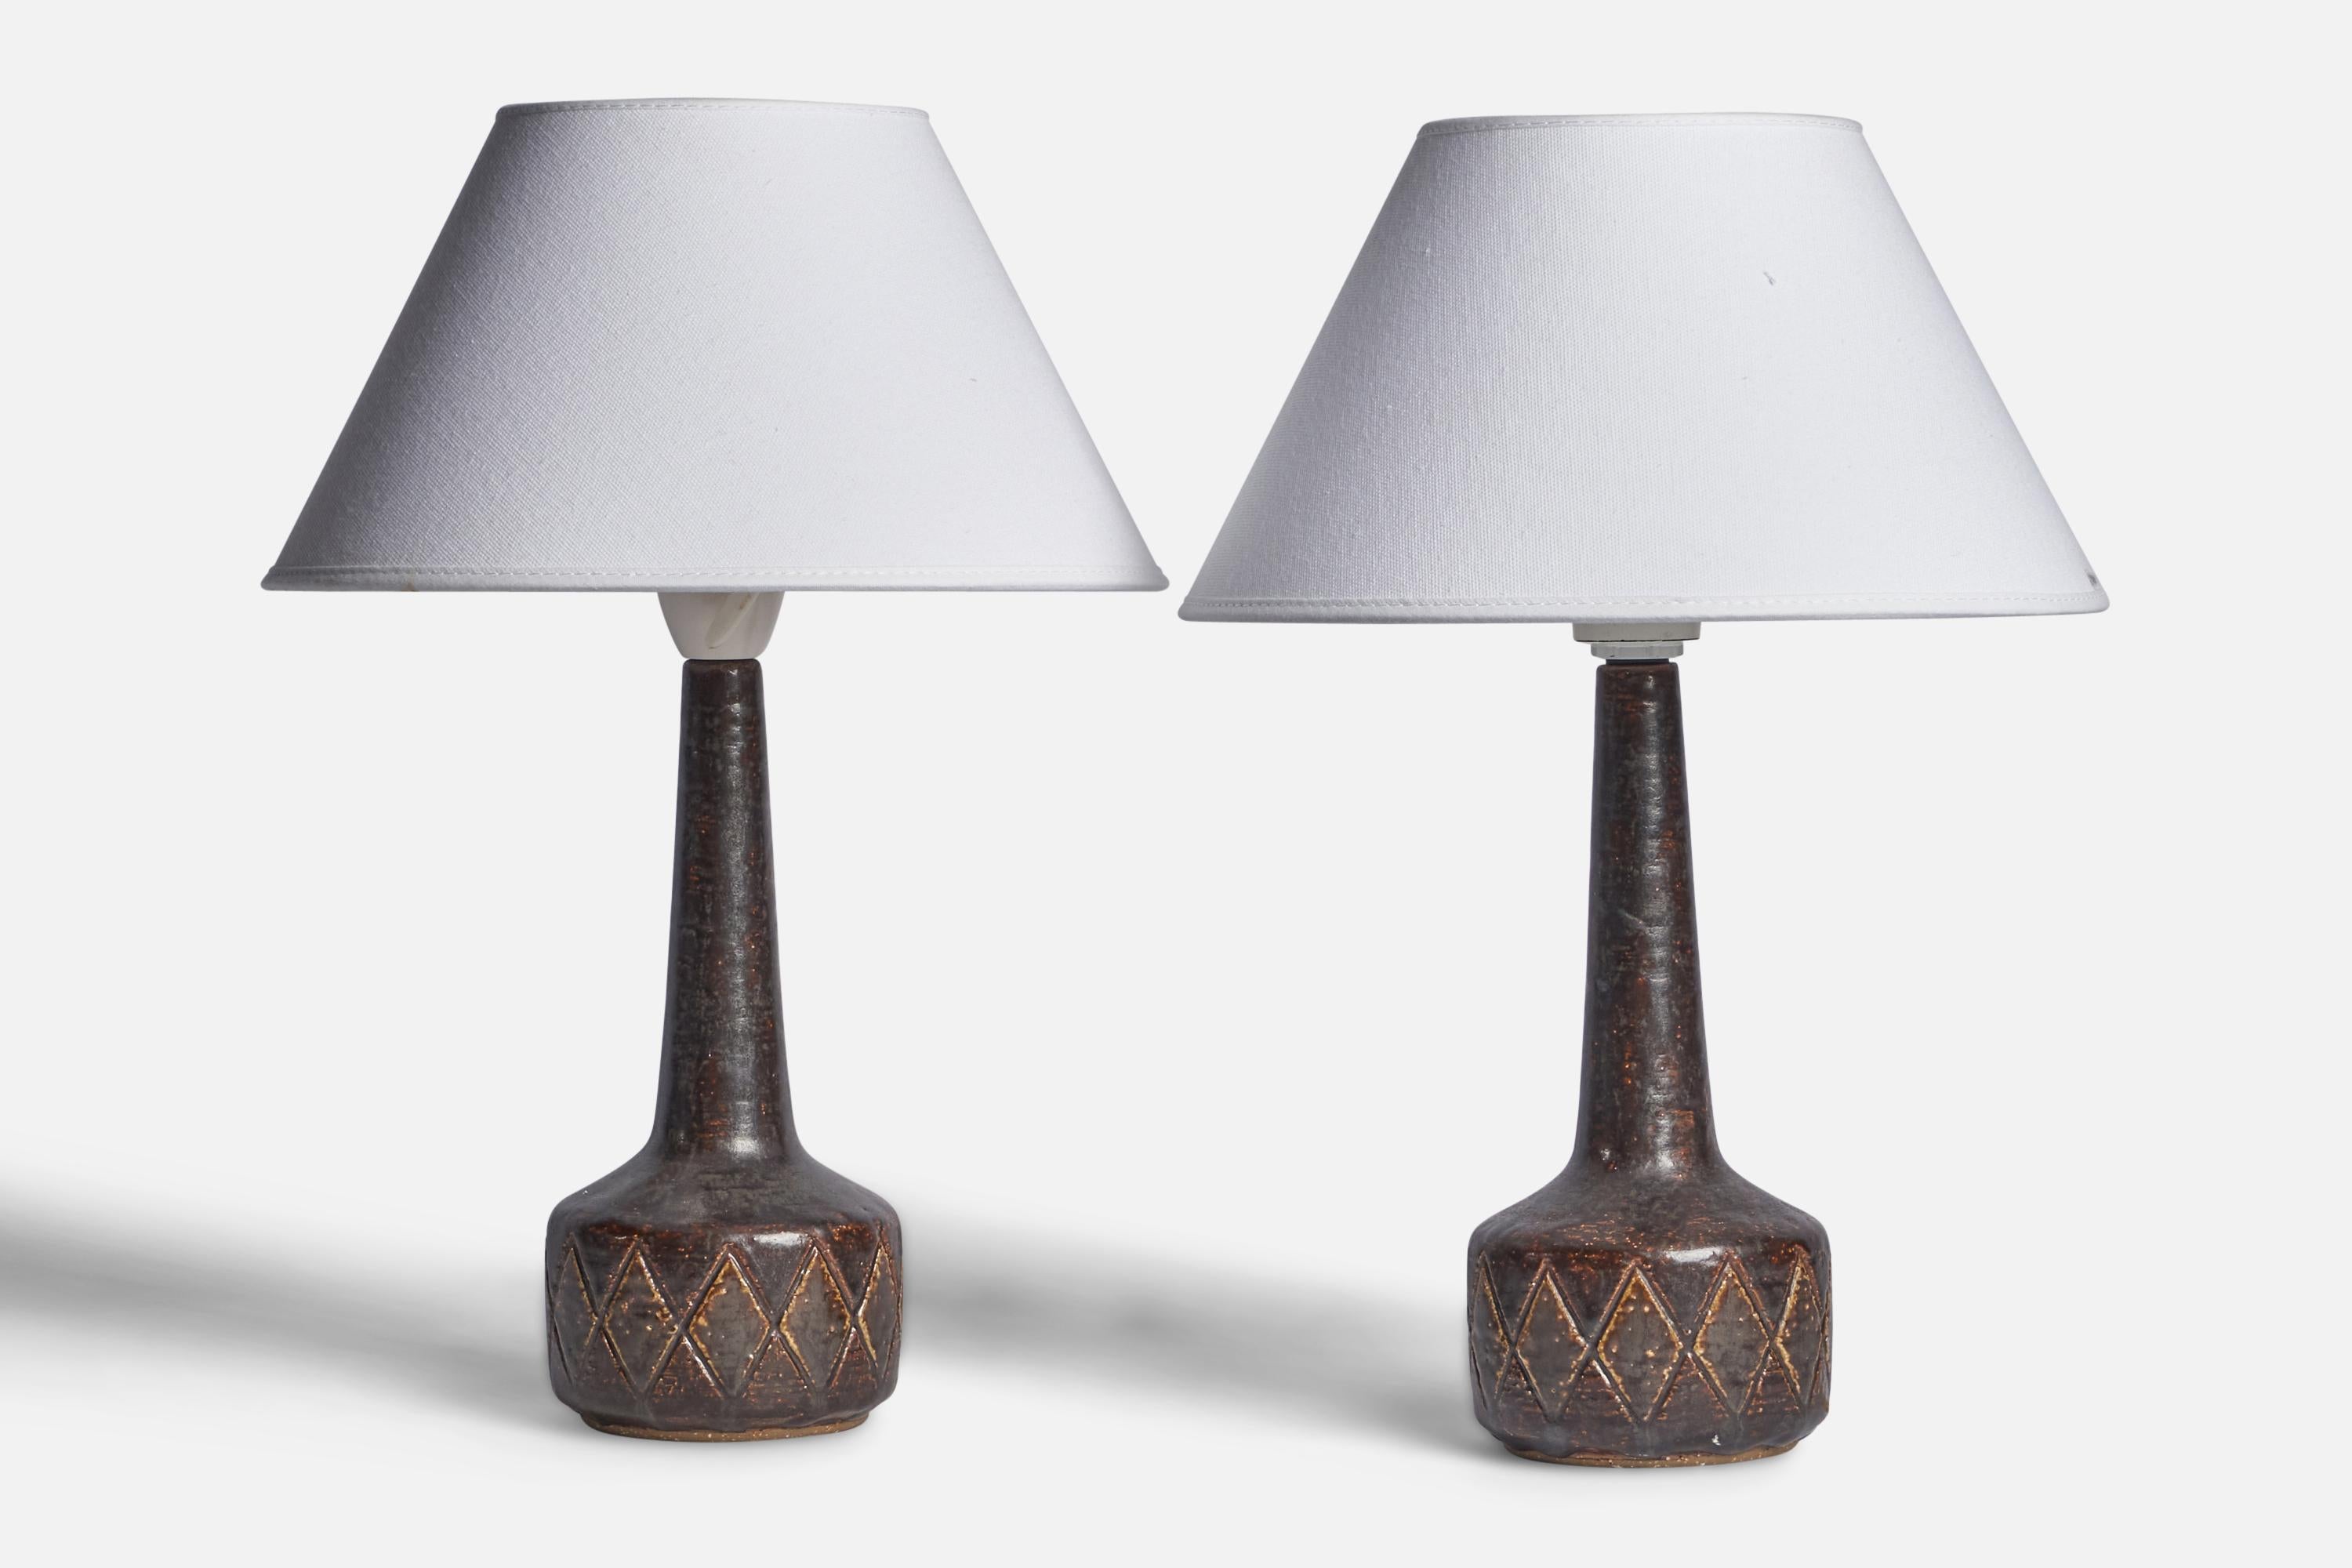 A pair of brown-glazed incised stoneware table lamps designed by Per & Annelise Linneman-Schmidt and produced by Palshus, Denmark, 1960s.

Dimensions of Lamp (inches): 11” H x 4” Diameter
Dimensions of Shade (inches): 4.5” Top Diameter x 10” Bottom